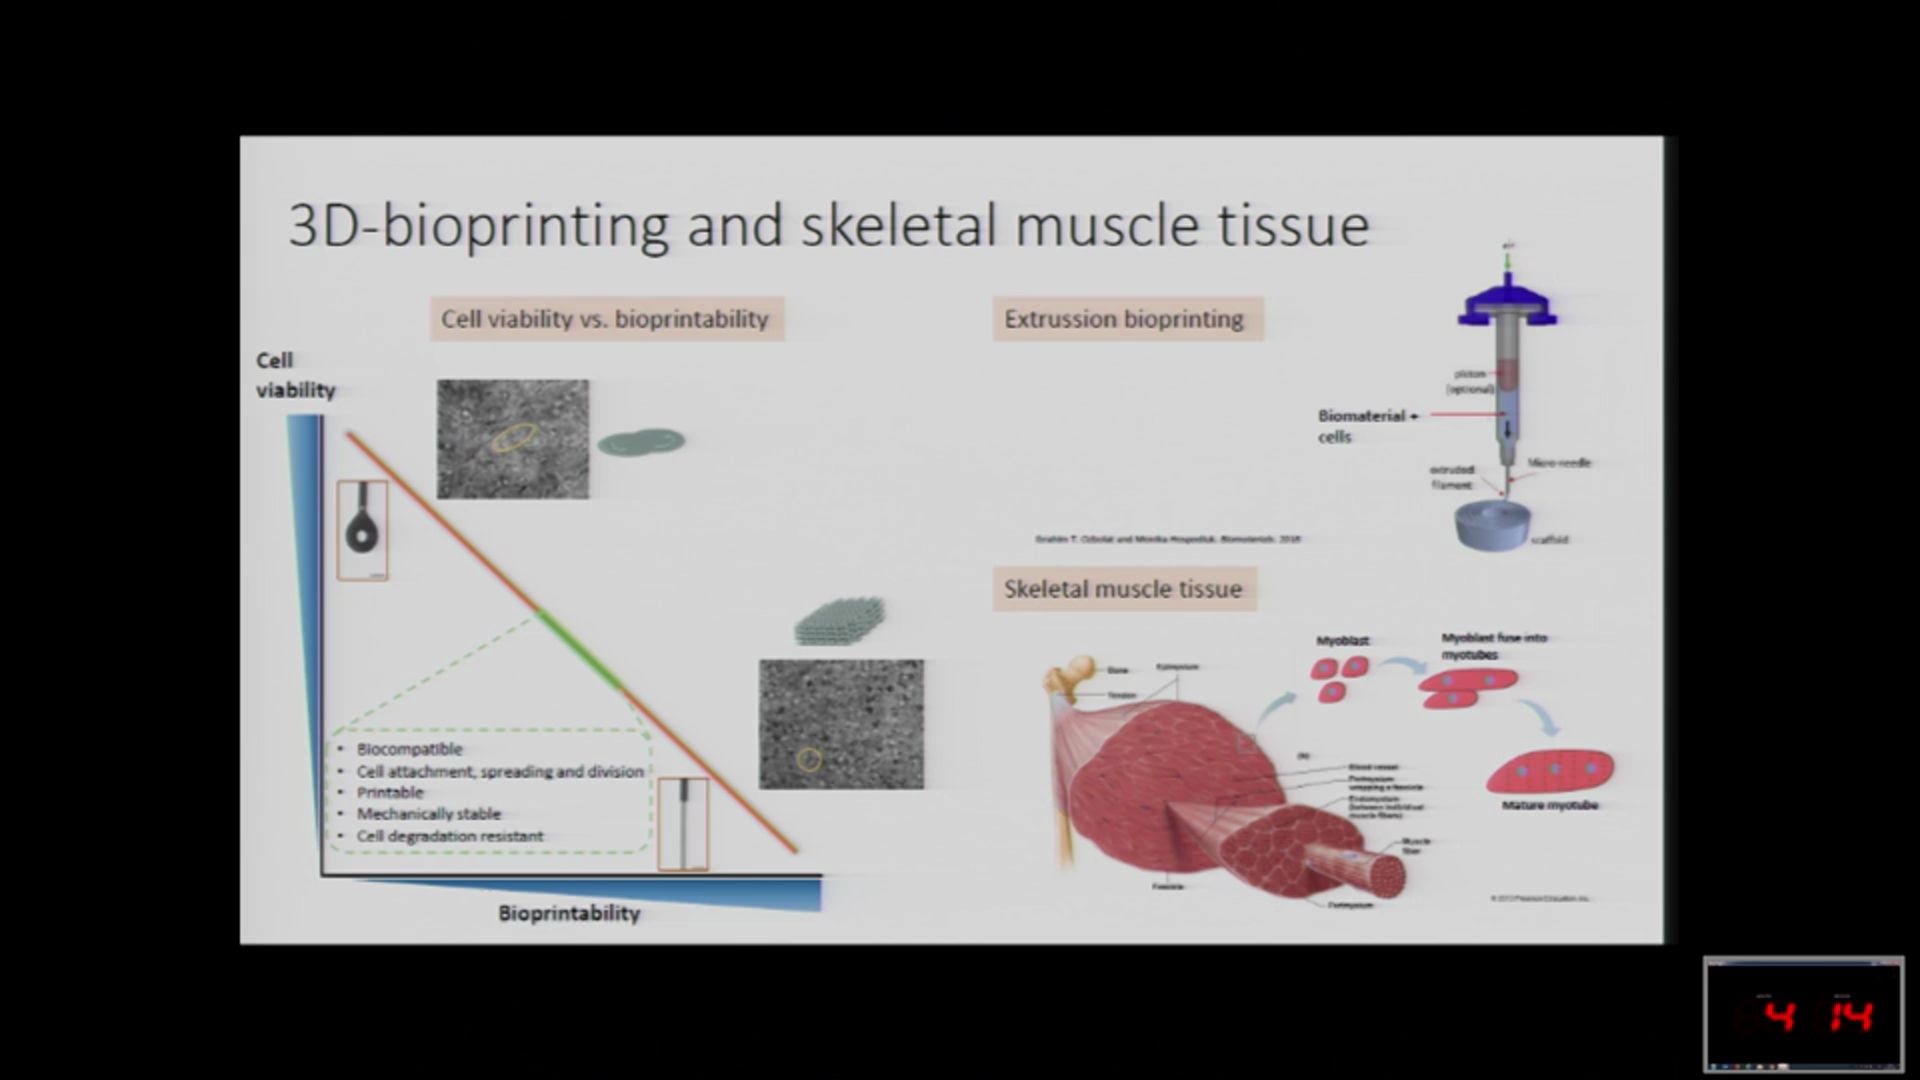 Composite biomaterials as long-lasting scaffolds for 3D bioprinting of highly aligned muscle tissue